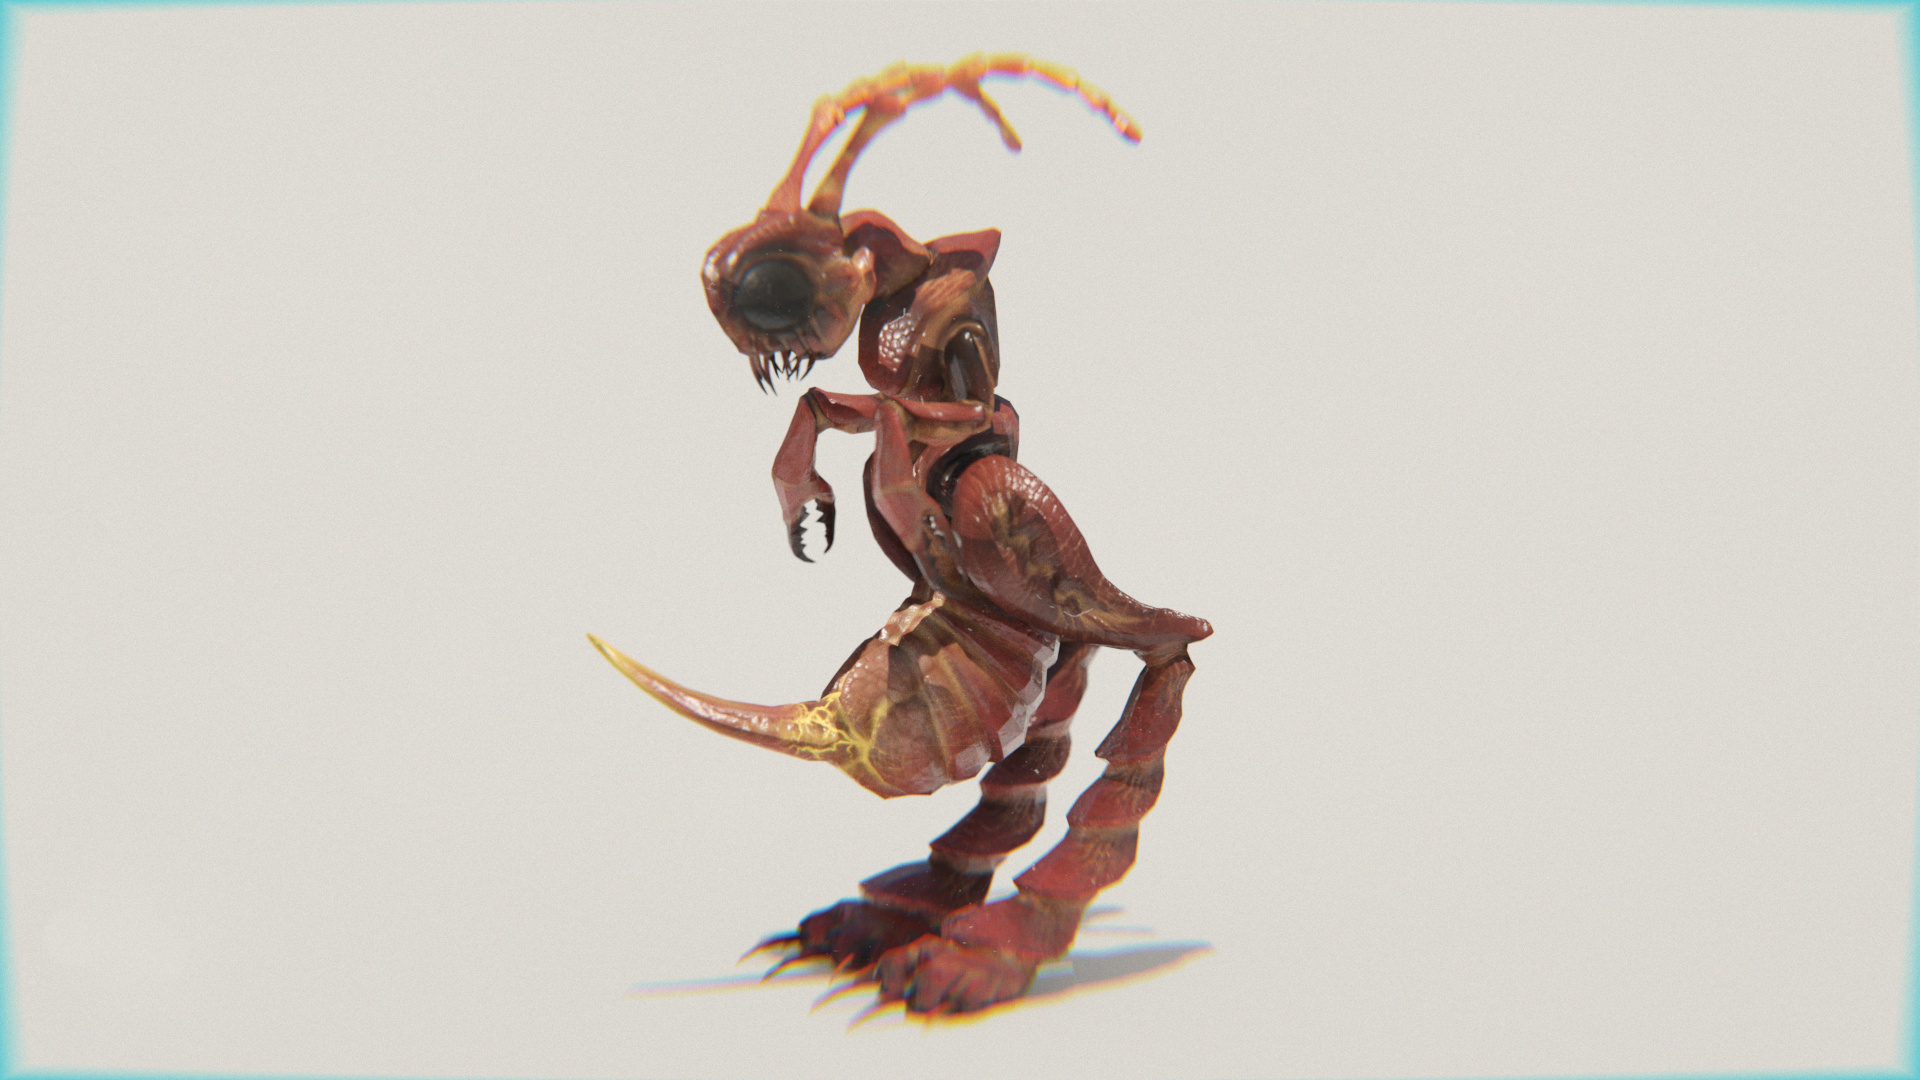 Giant Red Ant Monster standing pose